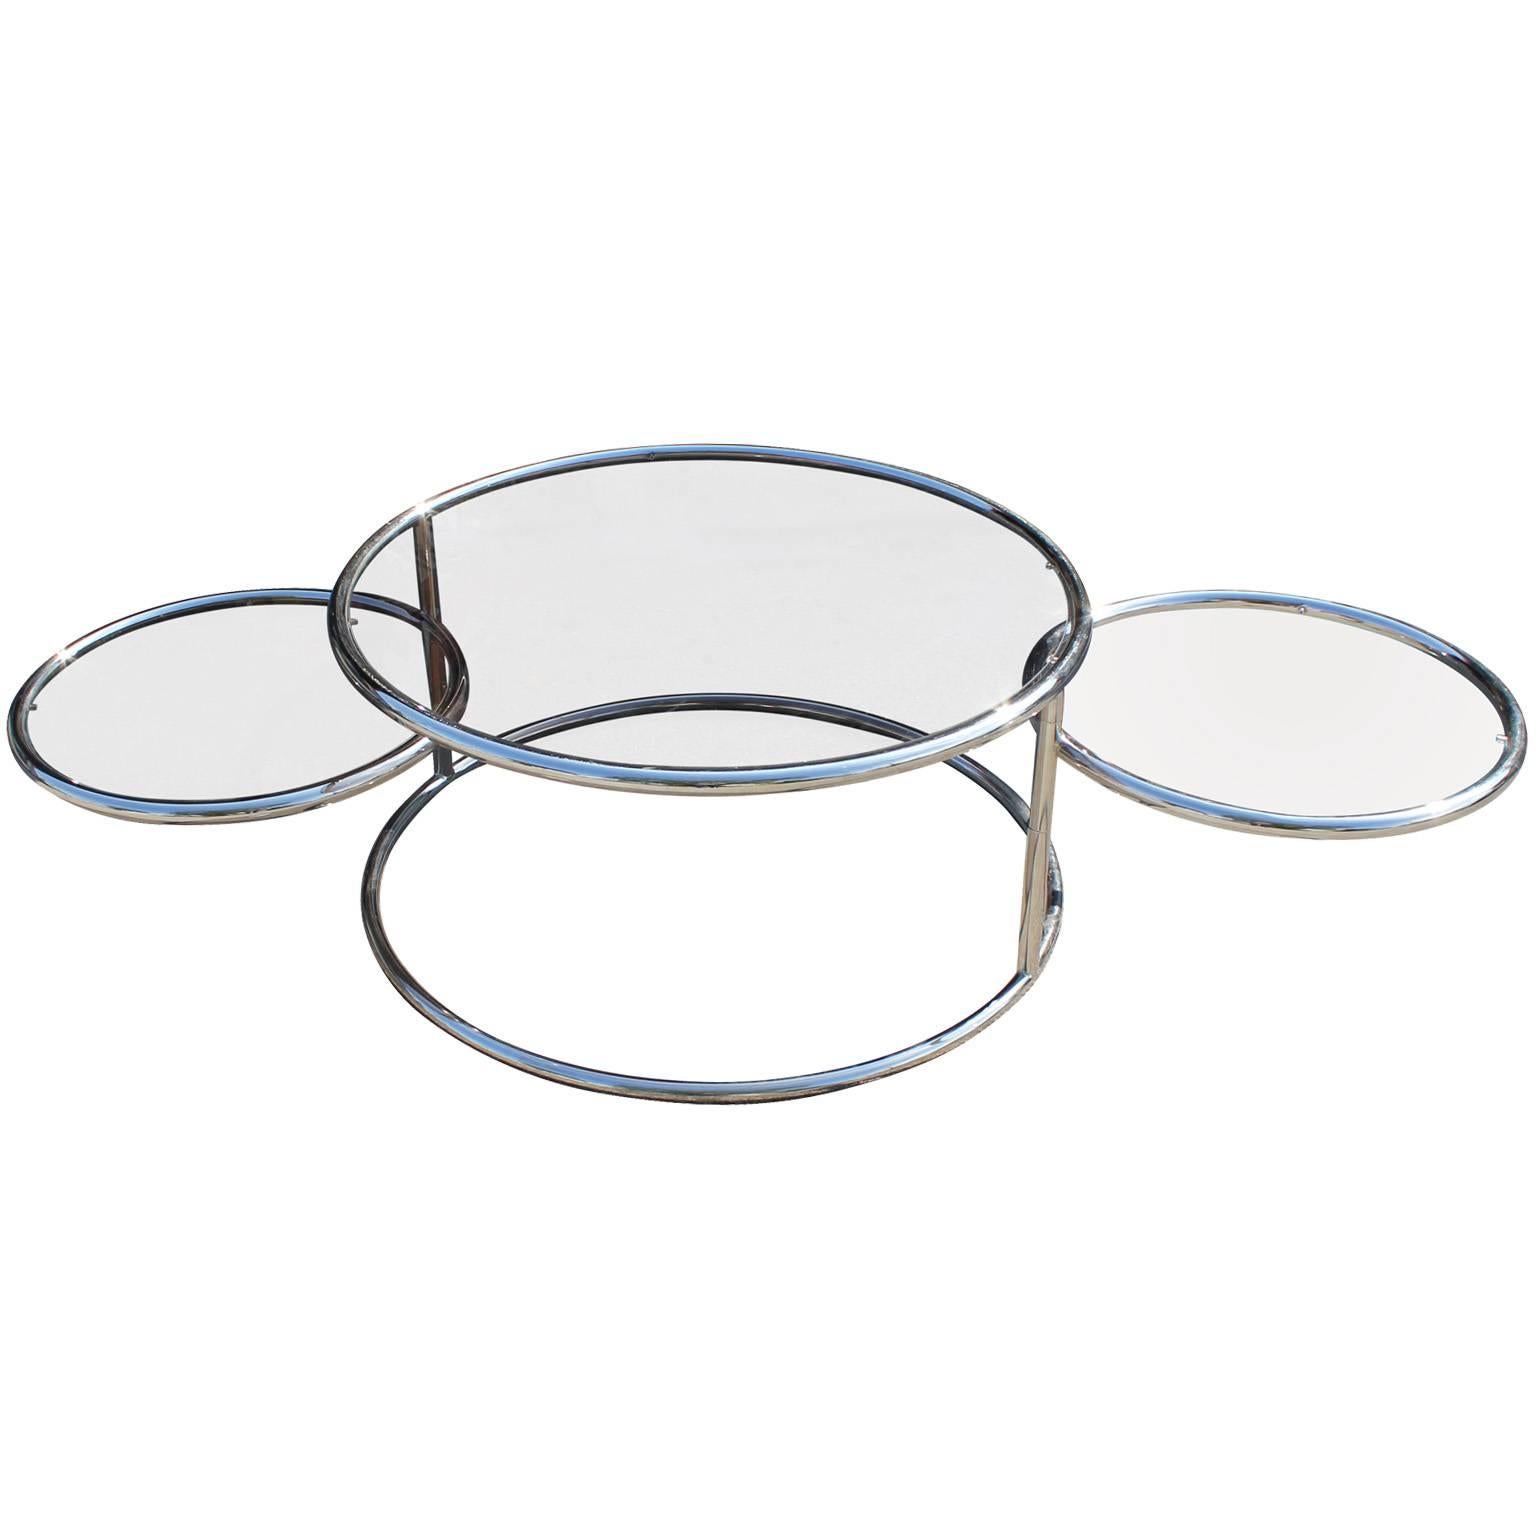 Great adjustable, round coffee table-smaller circular tables swivel 360 degrees. Table extends from 34" wide up to 77" wide. Table is constructed of chrome and lightly smoked glass.